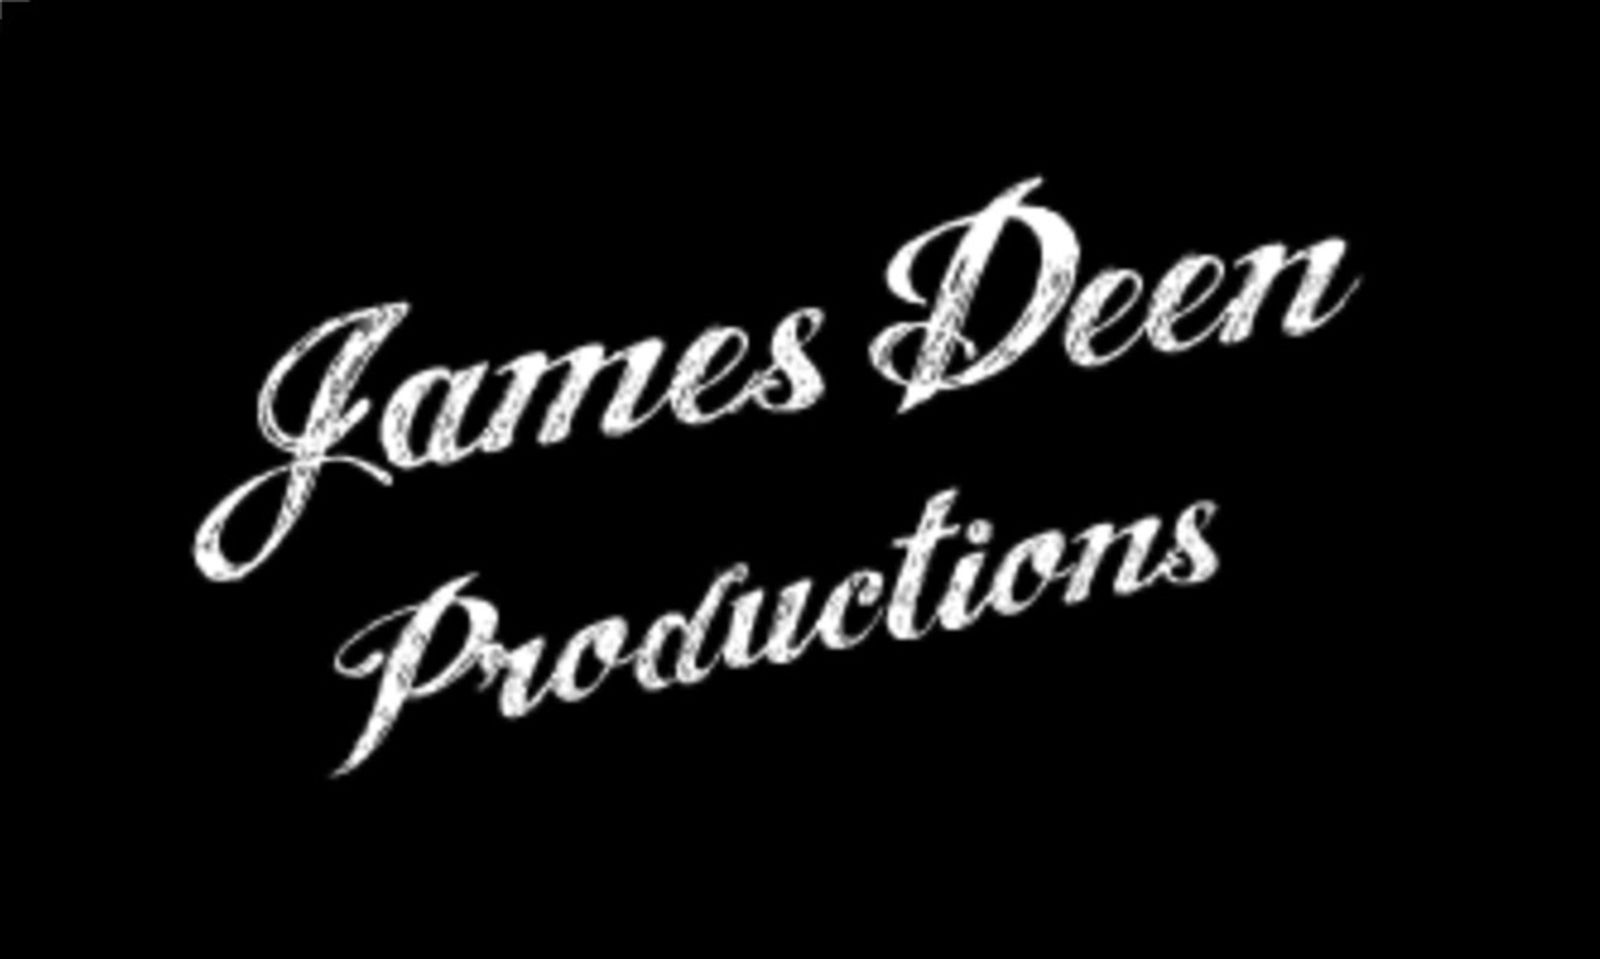 James Deen Productions Exposes 'Tattooed Girls 3'